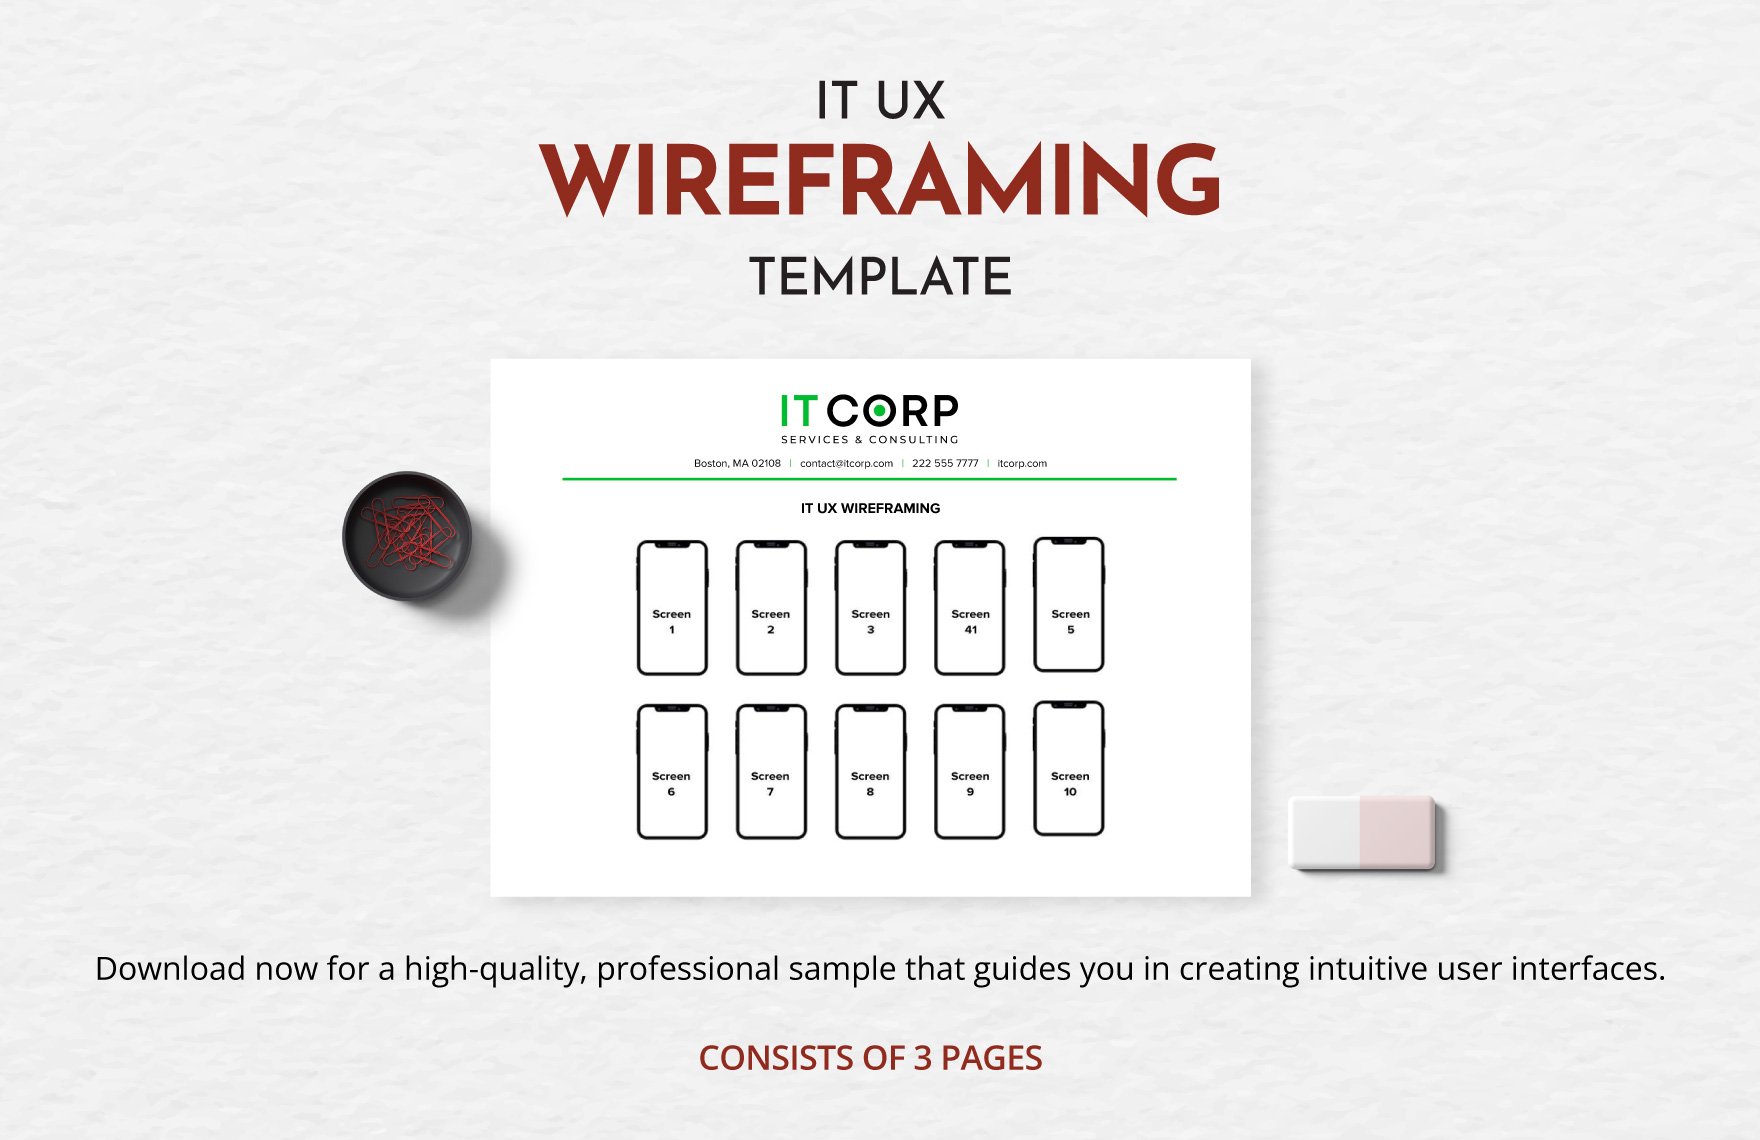 IT UX Wireframing Template